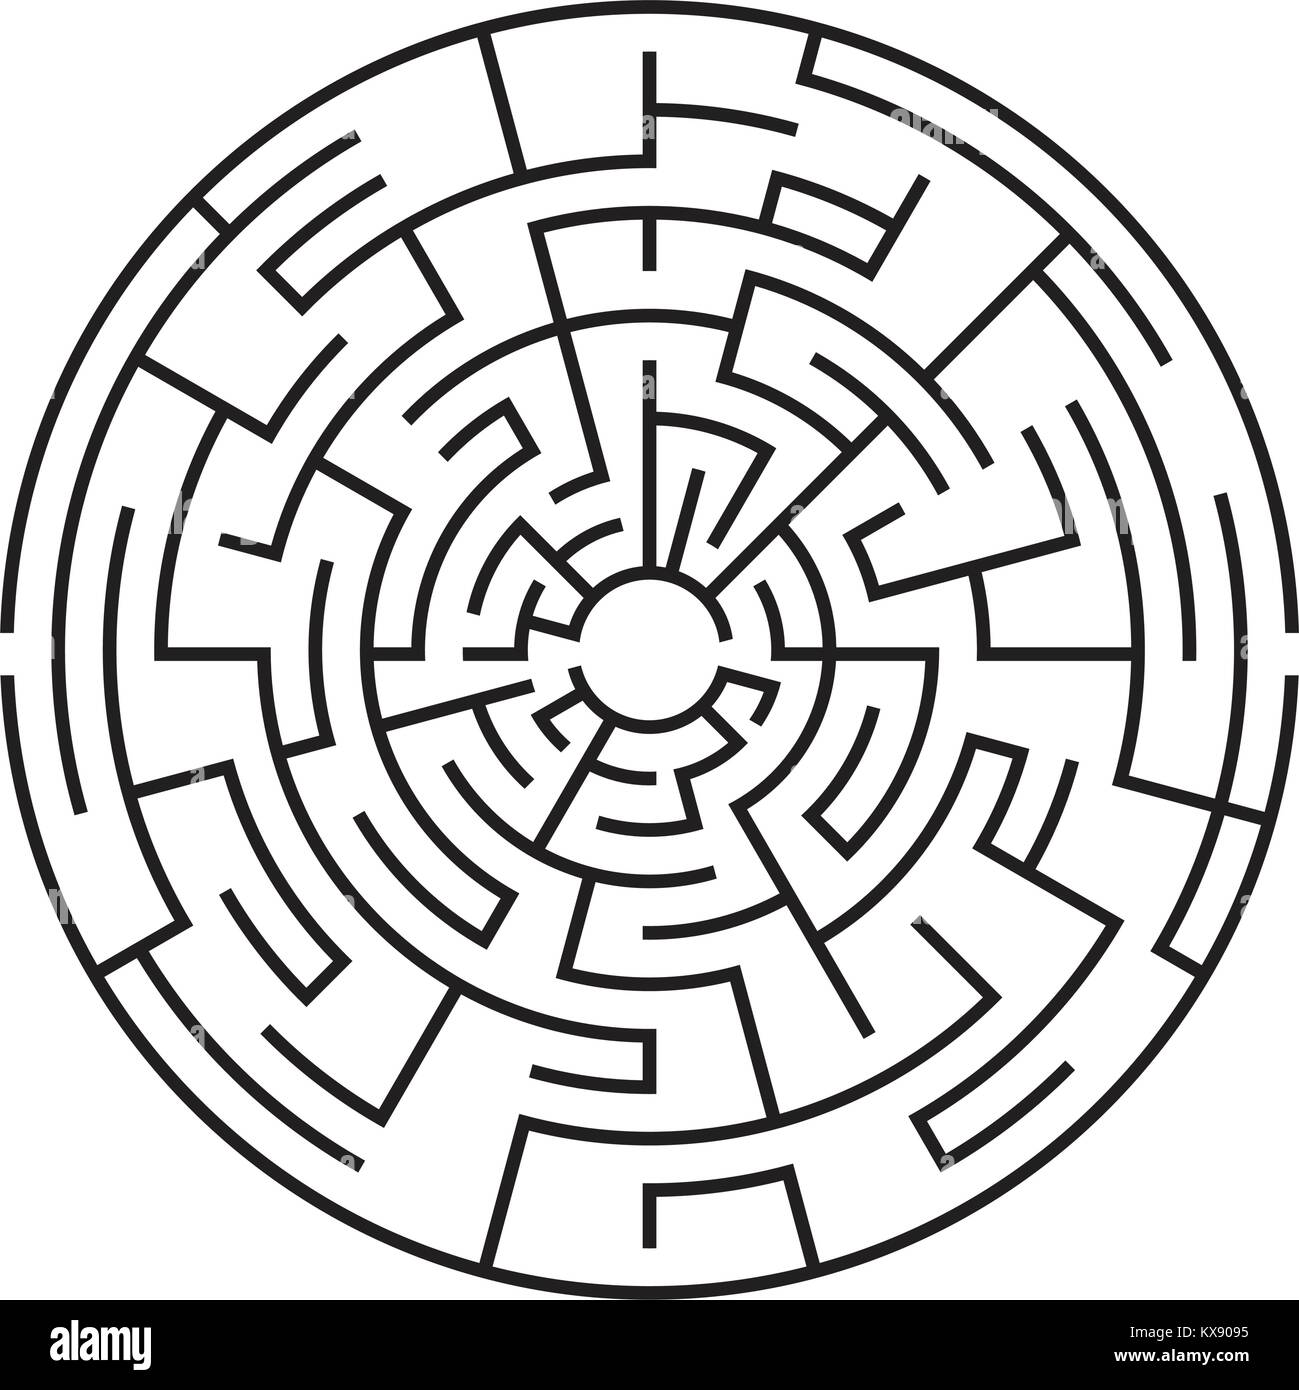 Circular maze isolated on white background. Medium complexity Stock Vector